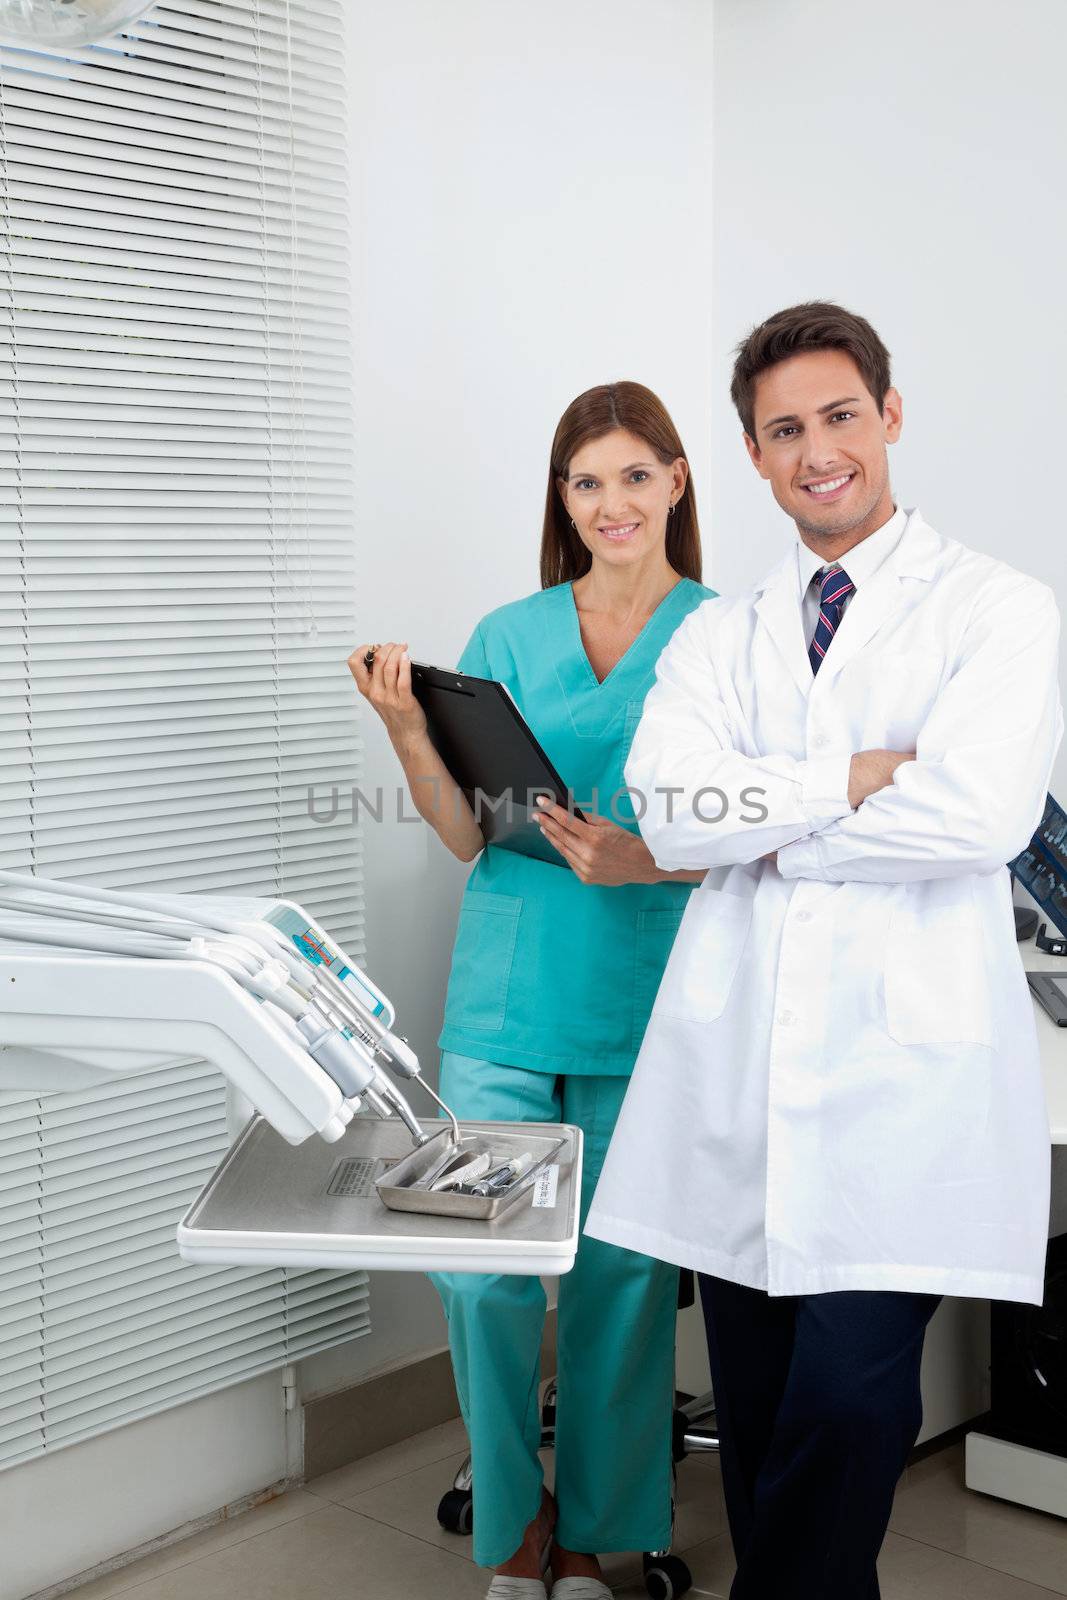 Dentist And Female Assistant In Clinic by leaf